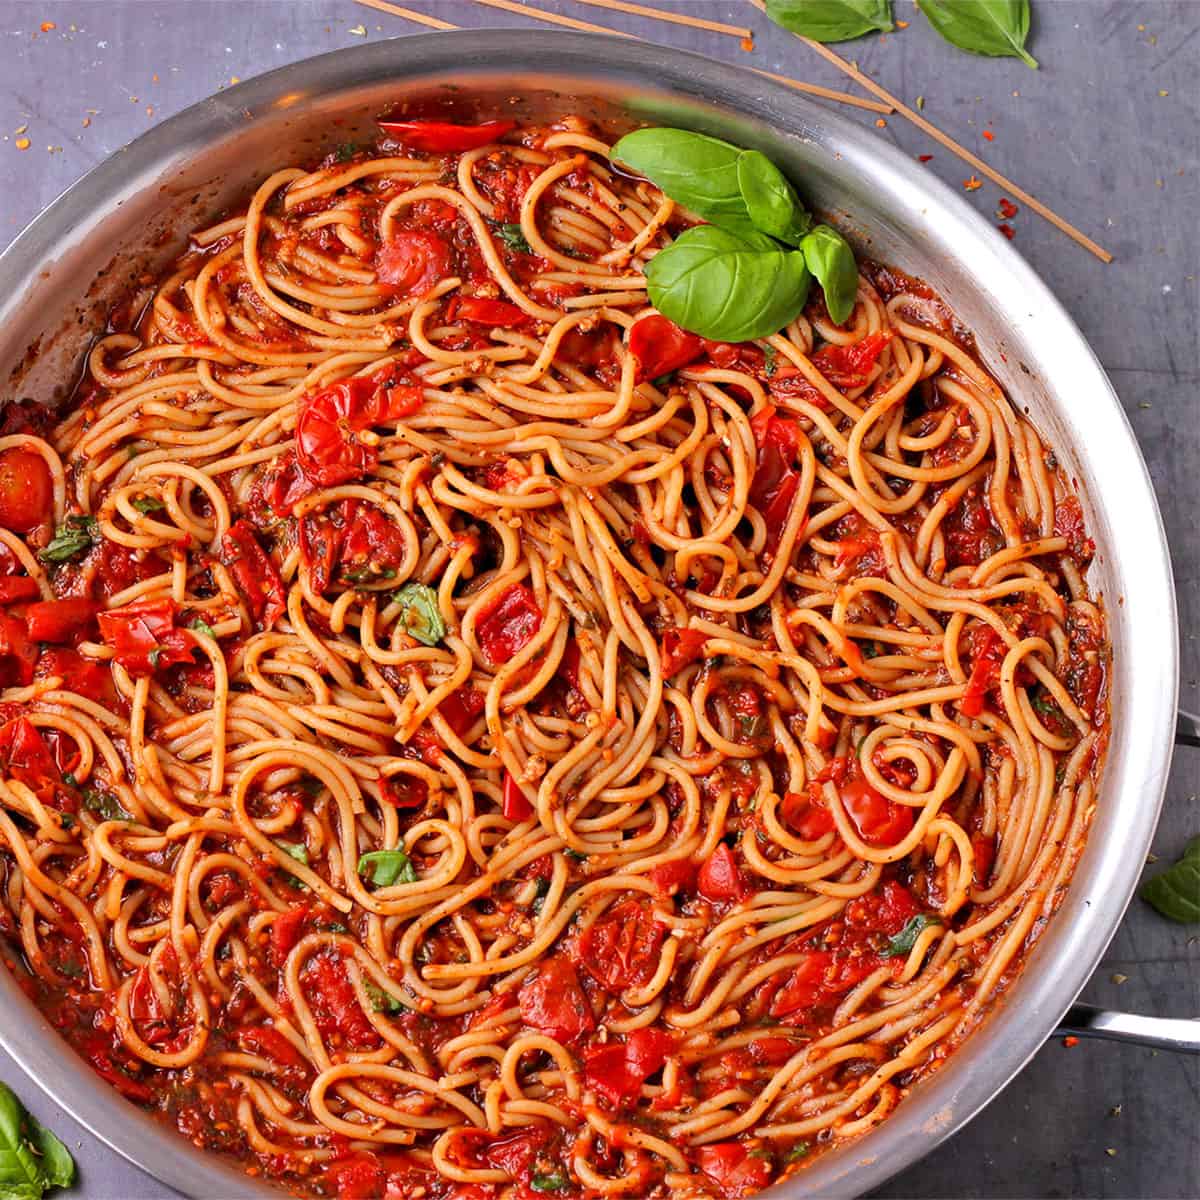 A skillet filled with cooked spaghetti and red sauce.